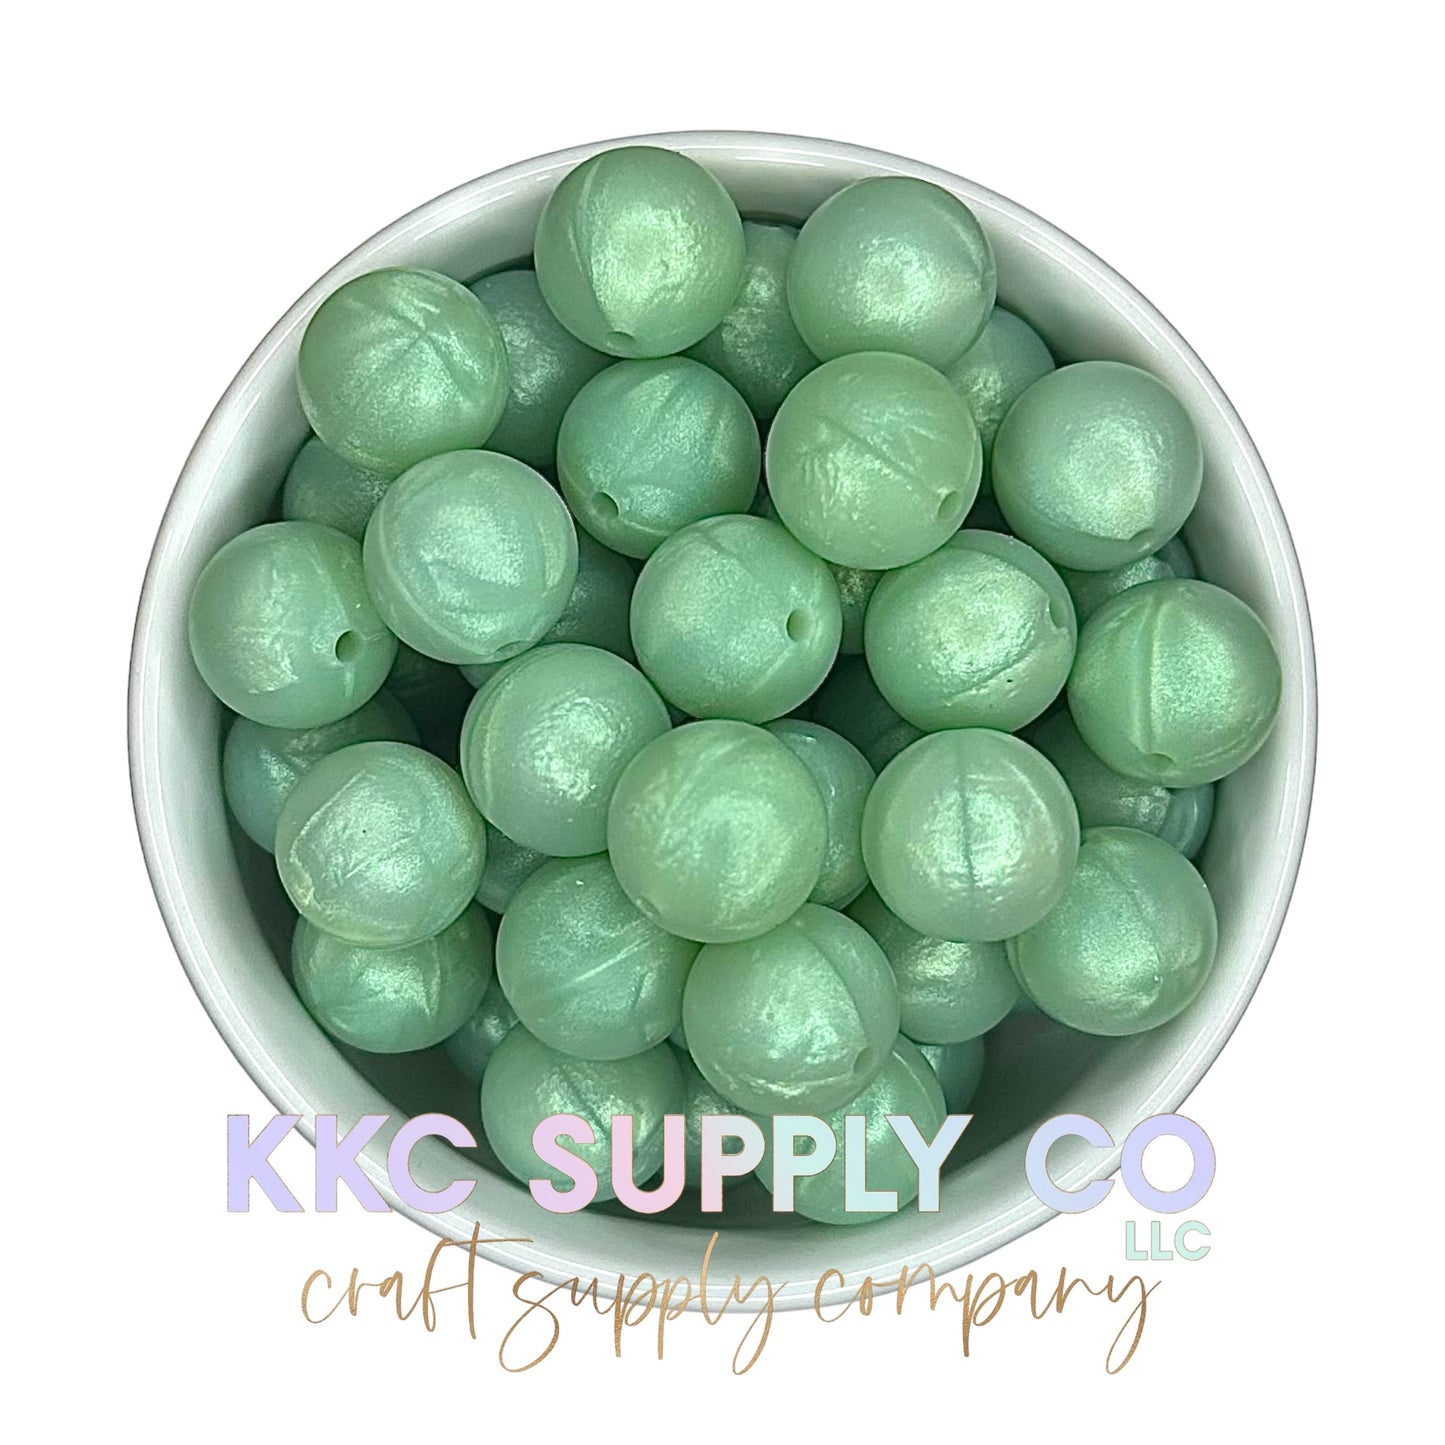 SS73-Light Green Shimmer Silicone Bead 15mm